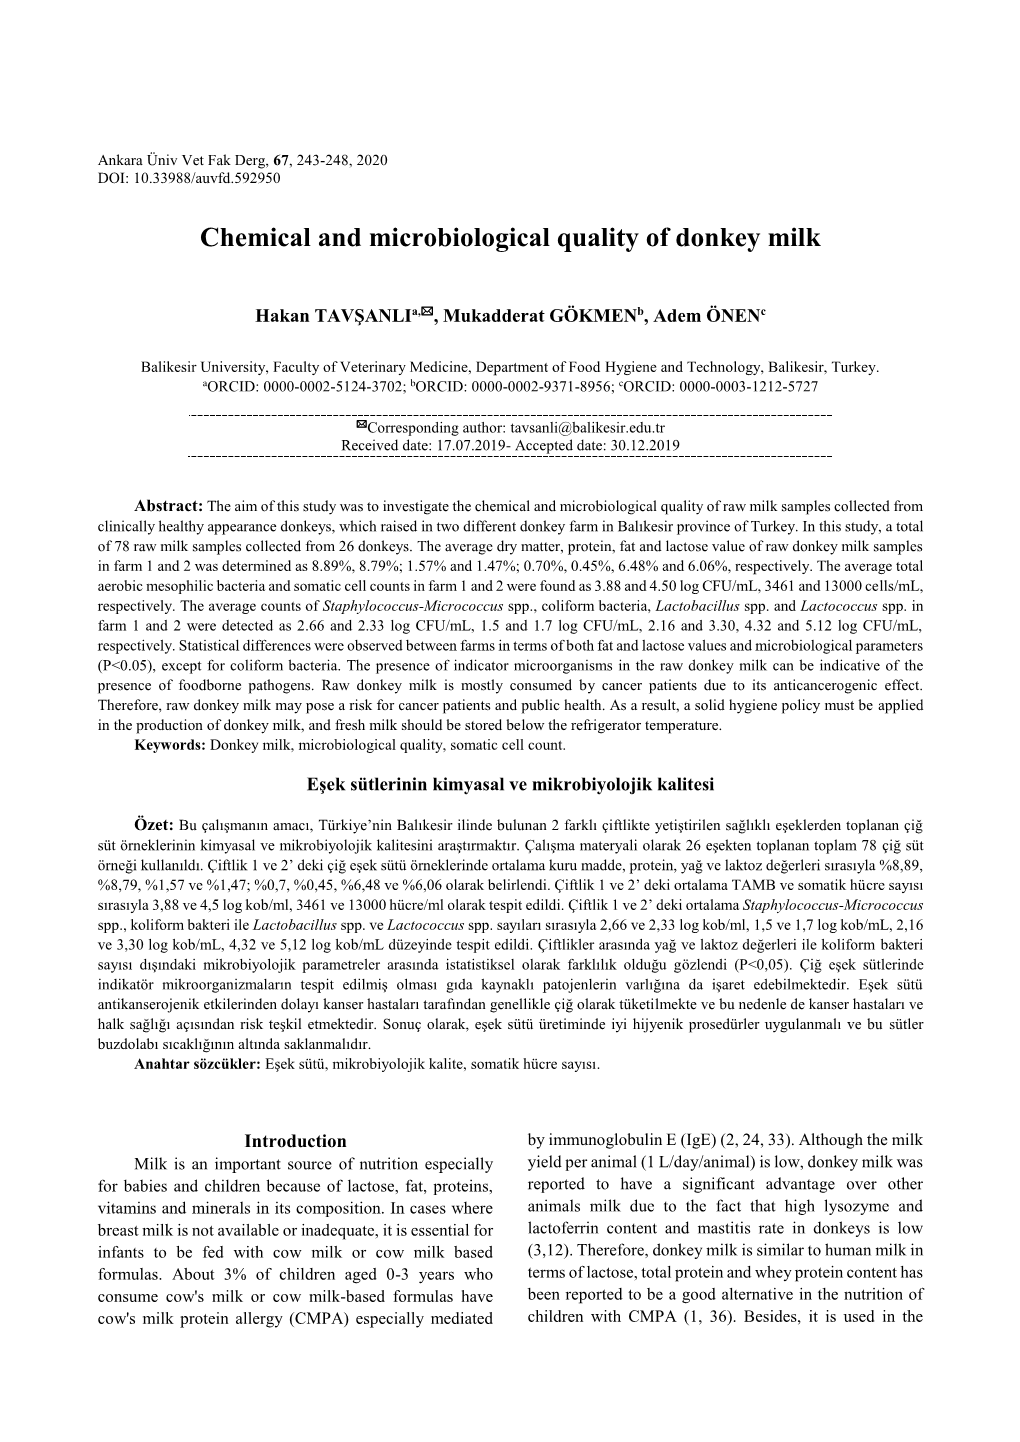 Chemical and Microbiological Quality of Donkey Milk